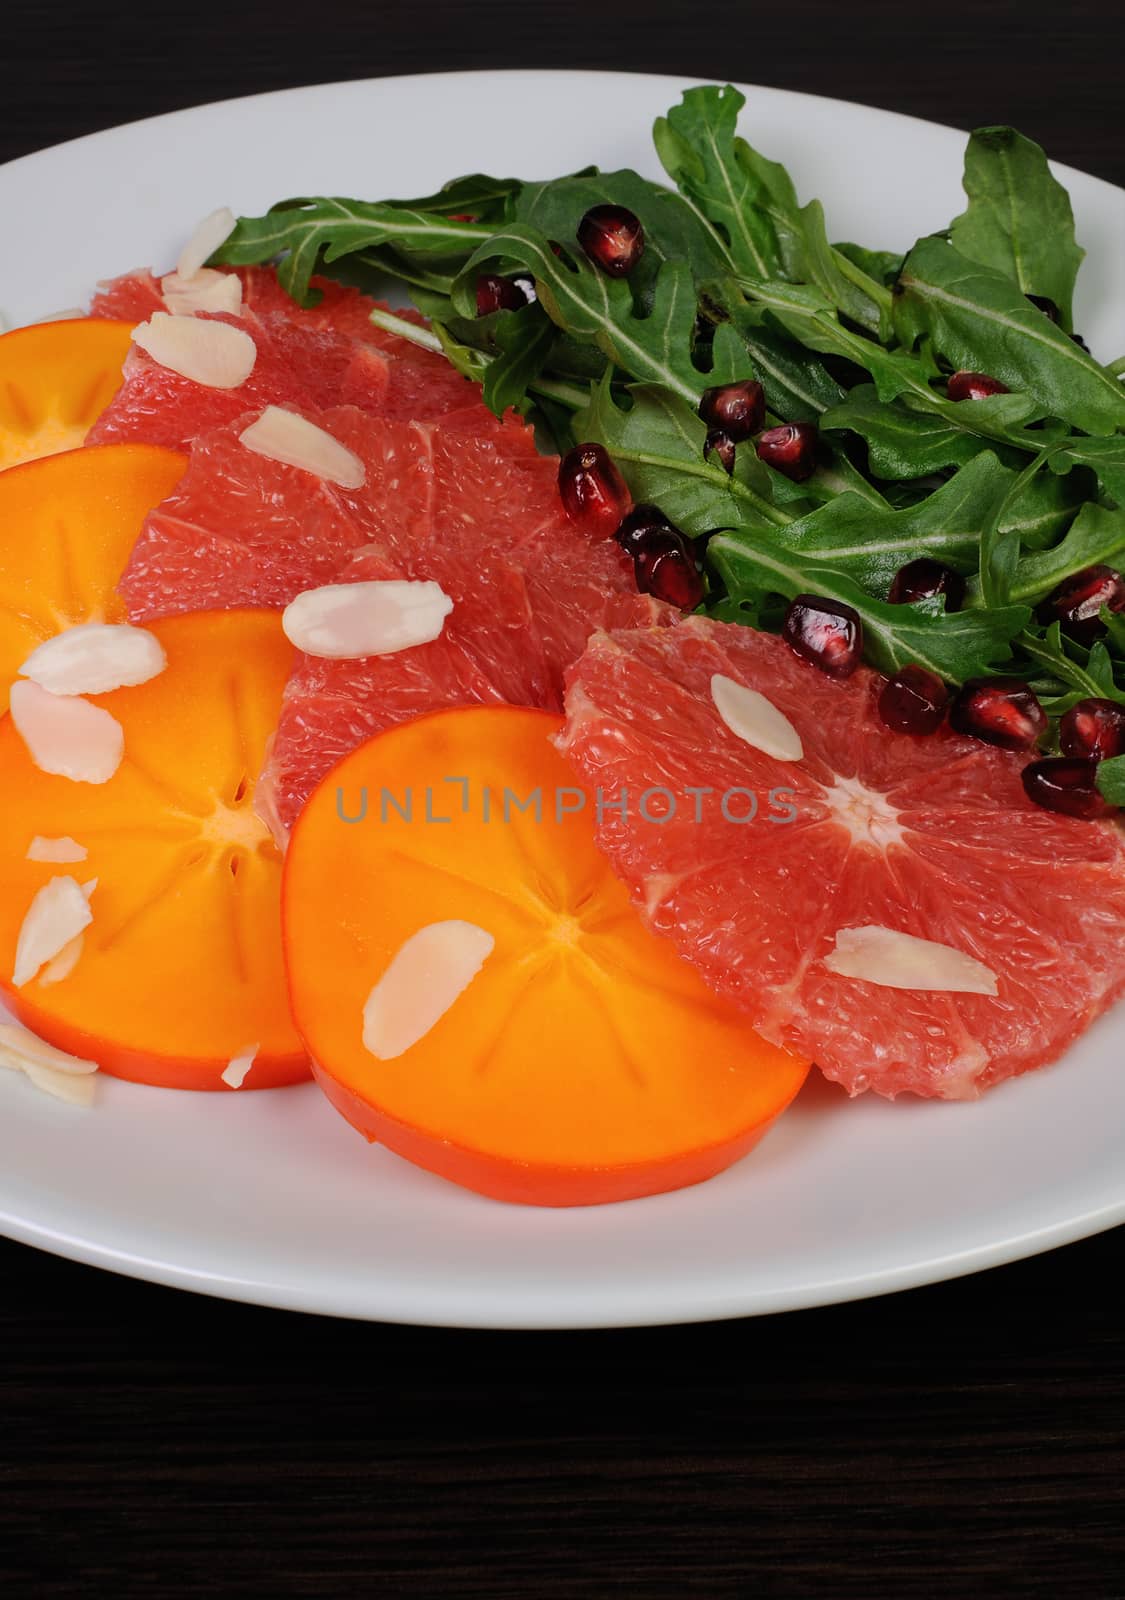 Salad of grapefruit, persimmon, pomegranate and rocket salad by Apolonia